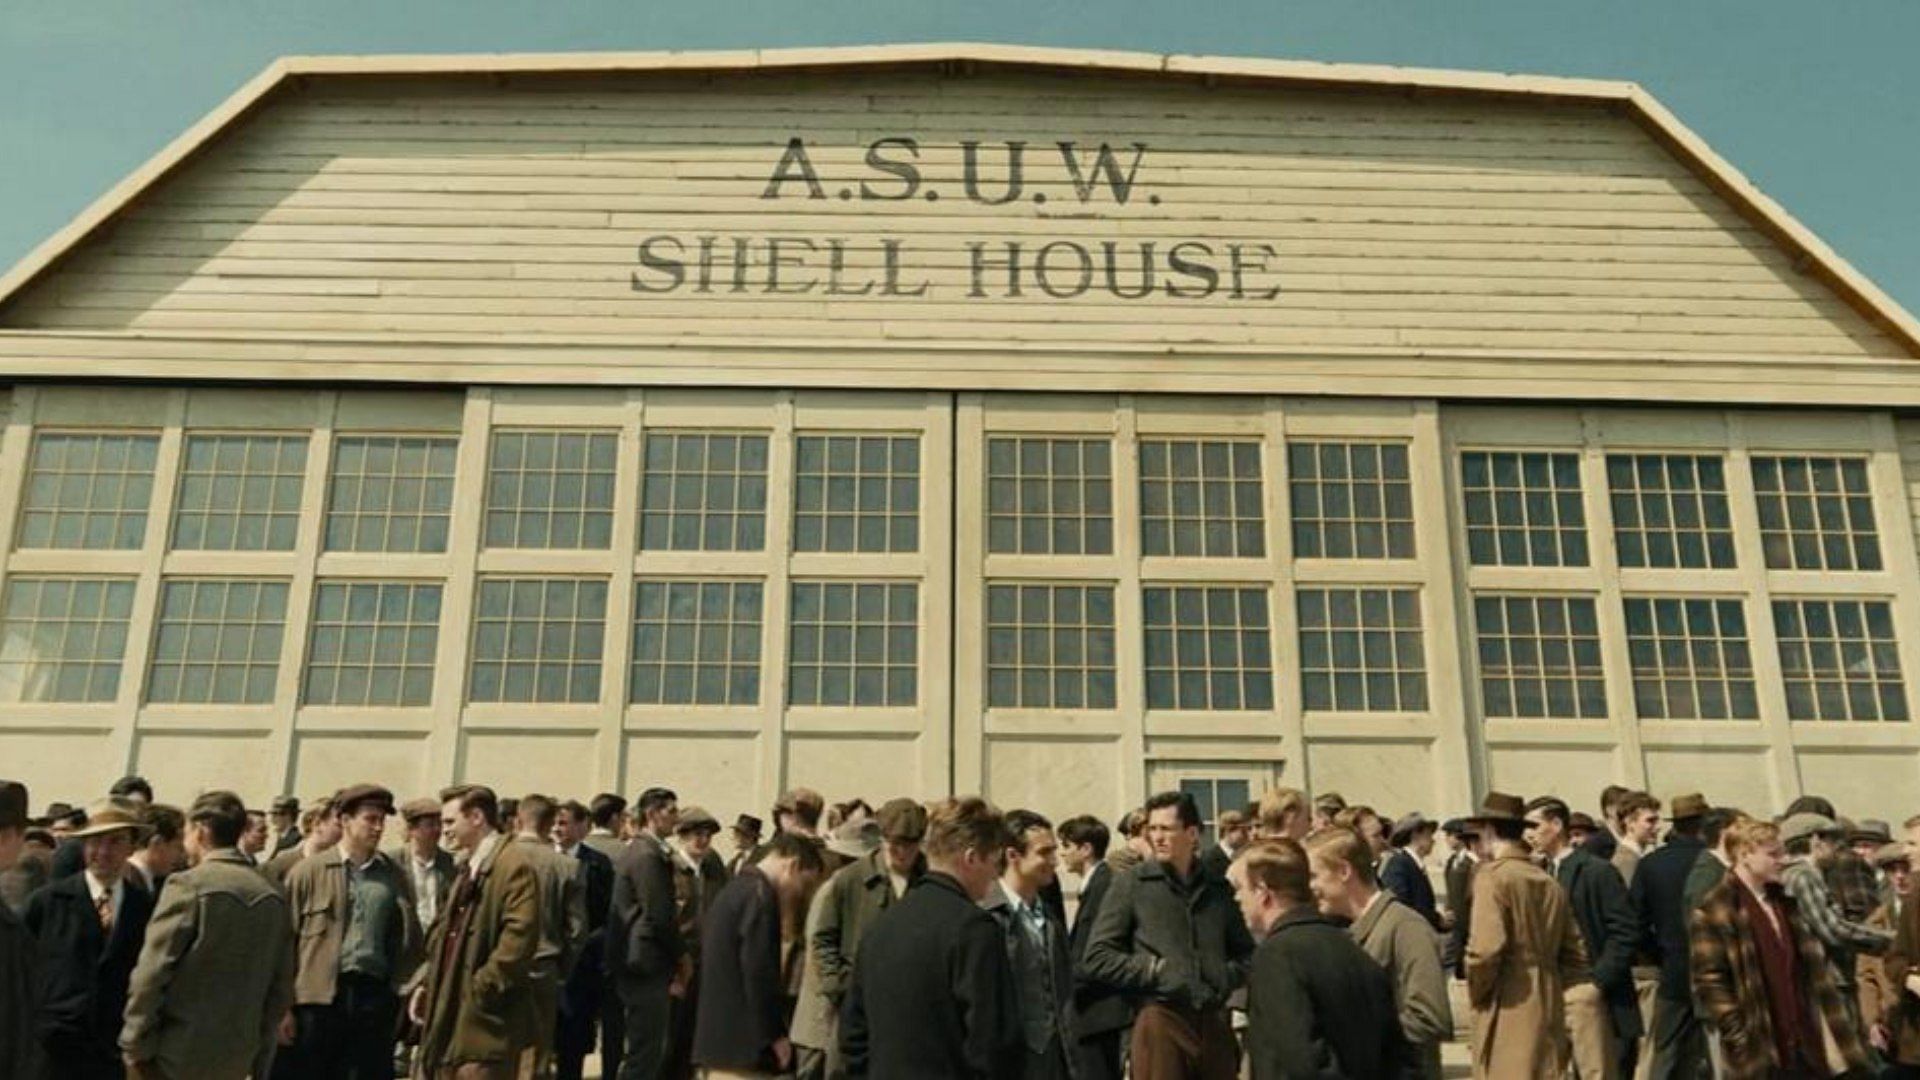 An image of the Shell House from the movie (Image via IMDb)